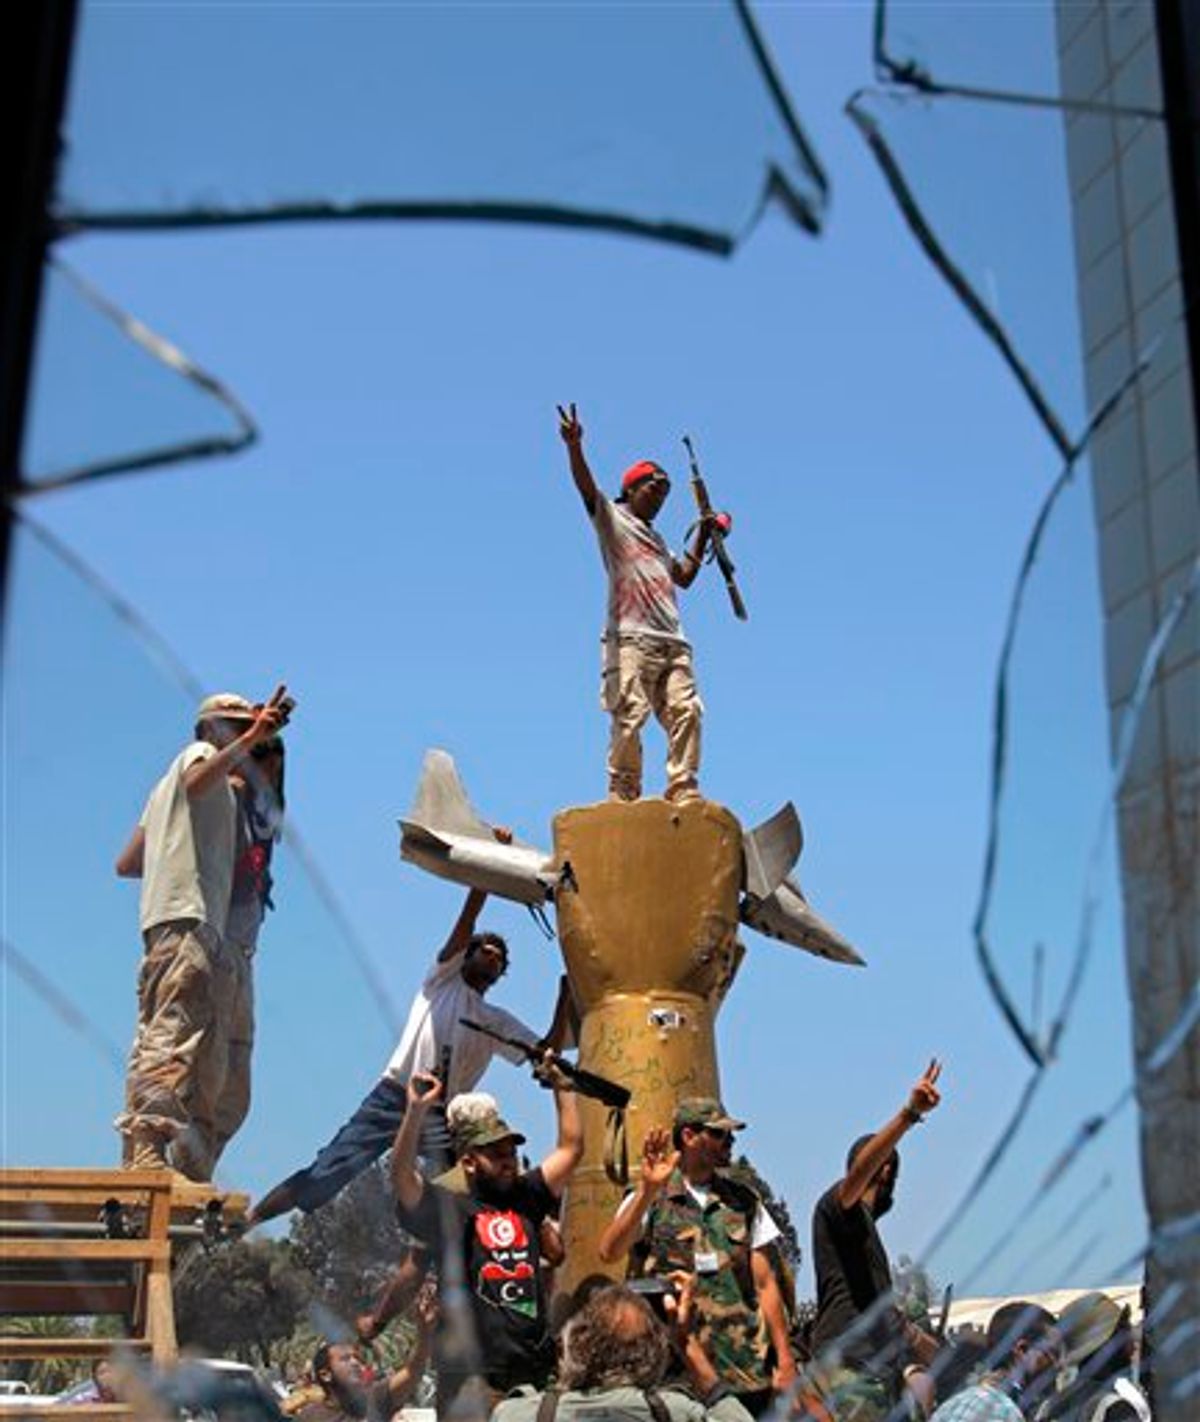 Rebel fighters celebrate as they stand on top of the monument inside the main Moammar Gadhafi compound in Bab Al-Aziziya in Tripoli, LIbya, Wednesday, Aug. 24, 2011. The rebels say they have now taken control of nearly all of Tripoli, but sporadic gunfire could still be heard Wednesday, and Gadhafi loyalists fired shells and assault rifles at fighters who had captured the Libyan leader's personal compound one day earlier. (AP Photo/Sergey Ponomarev) (AP)